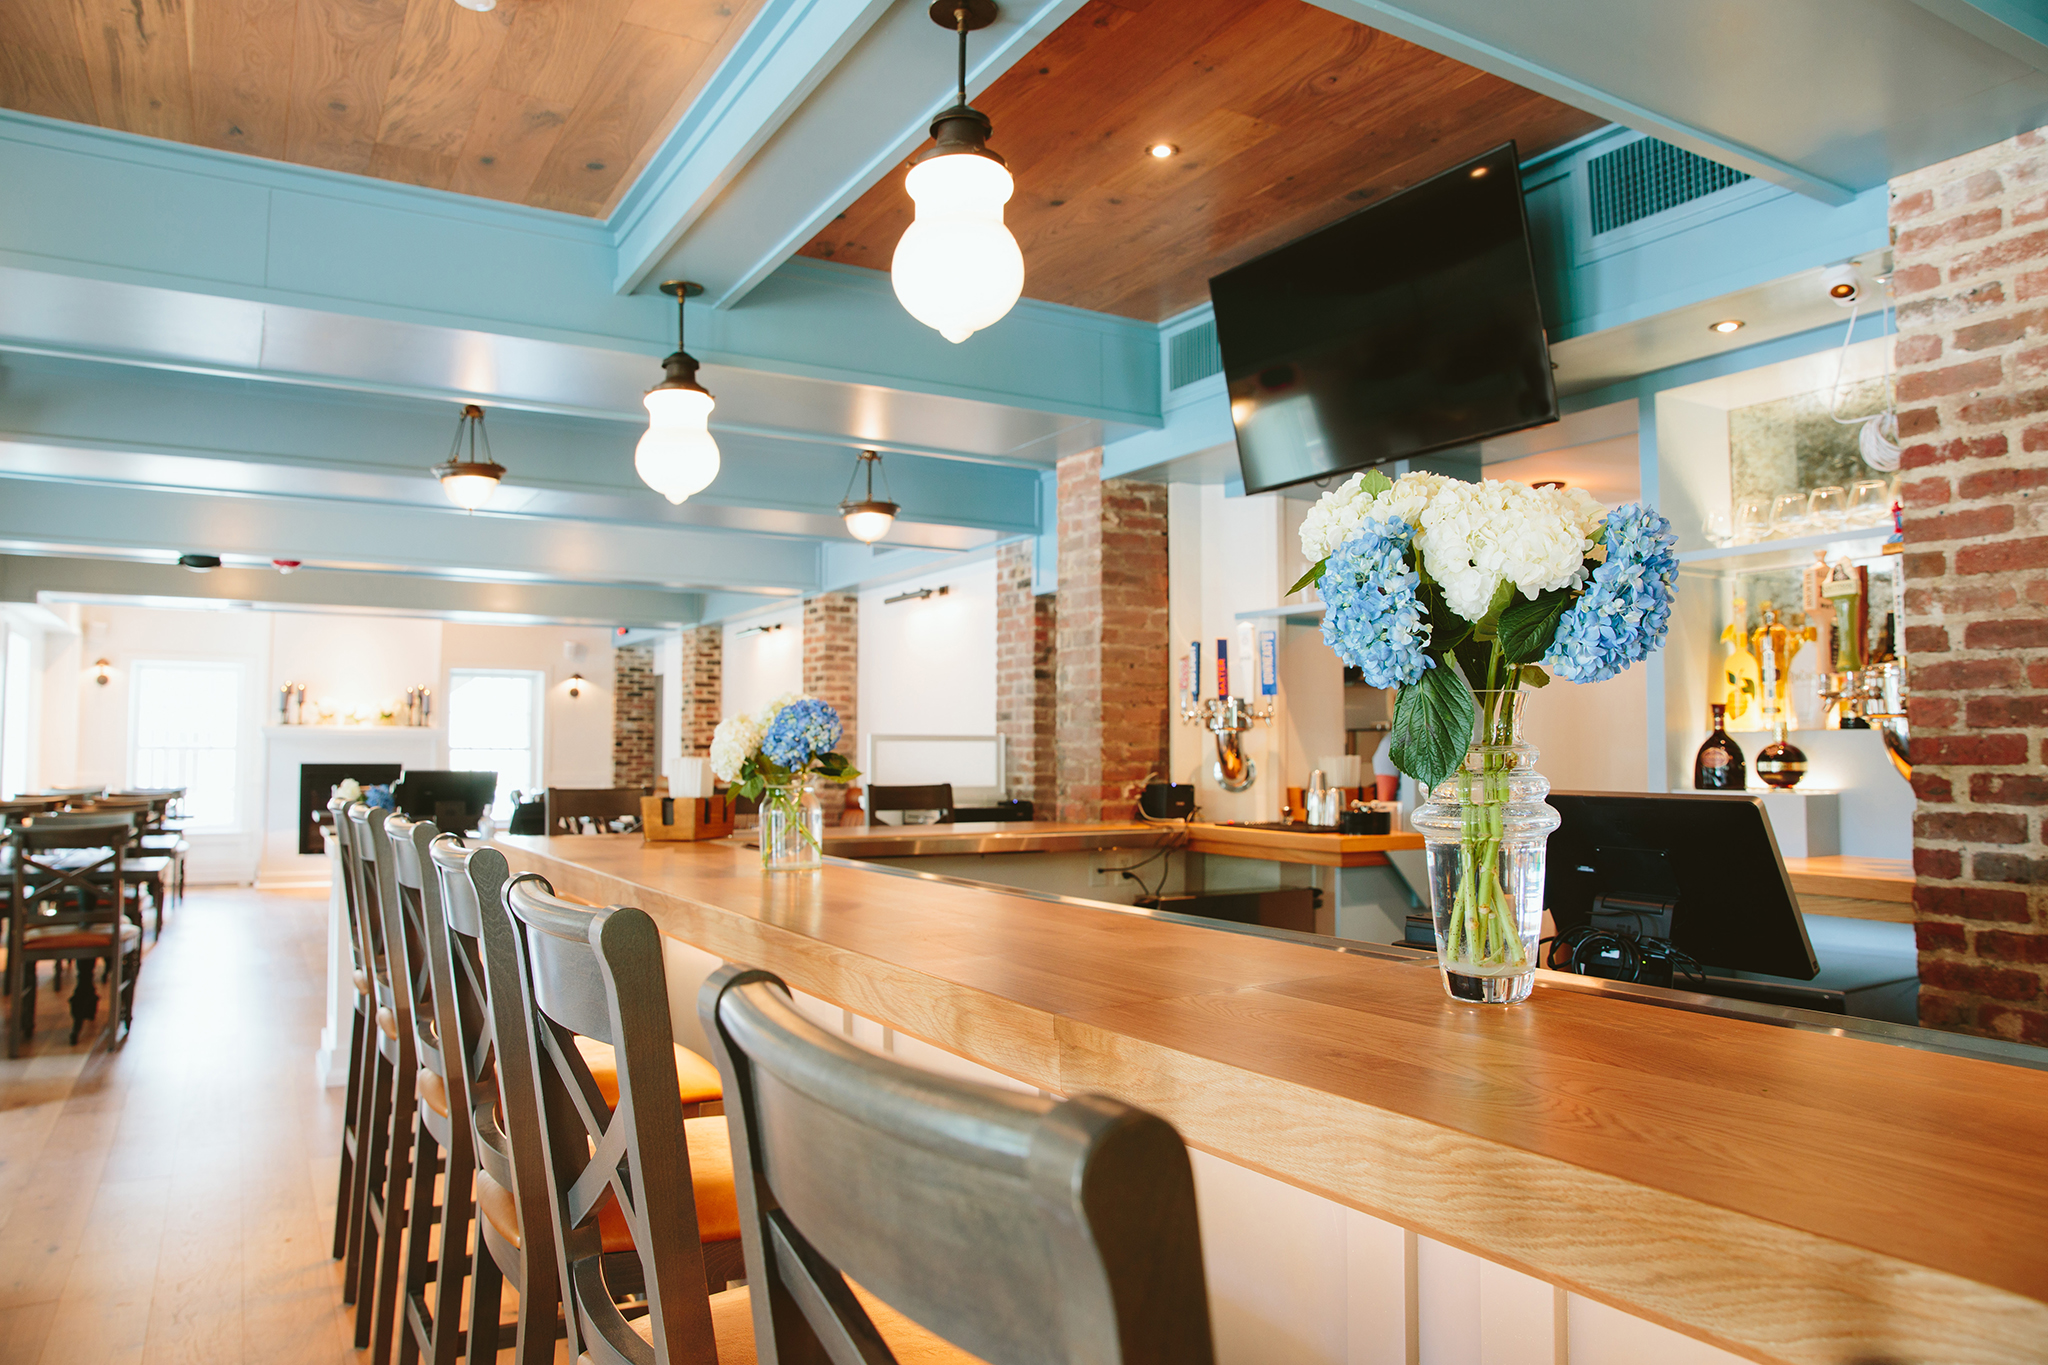 Custom modern tavern and pub interior design and furnishing, with bar, chairs, television, and lighting